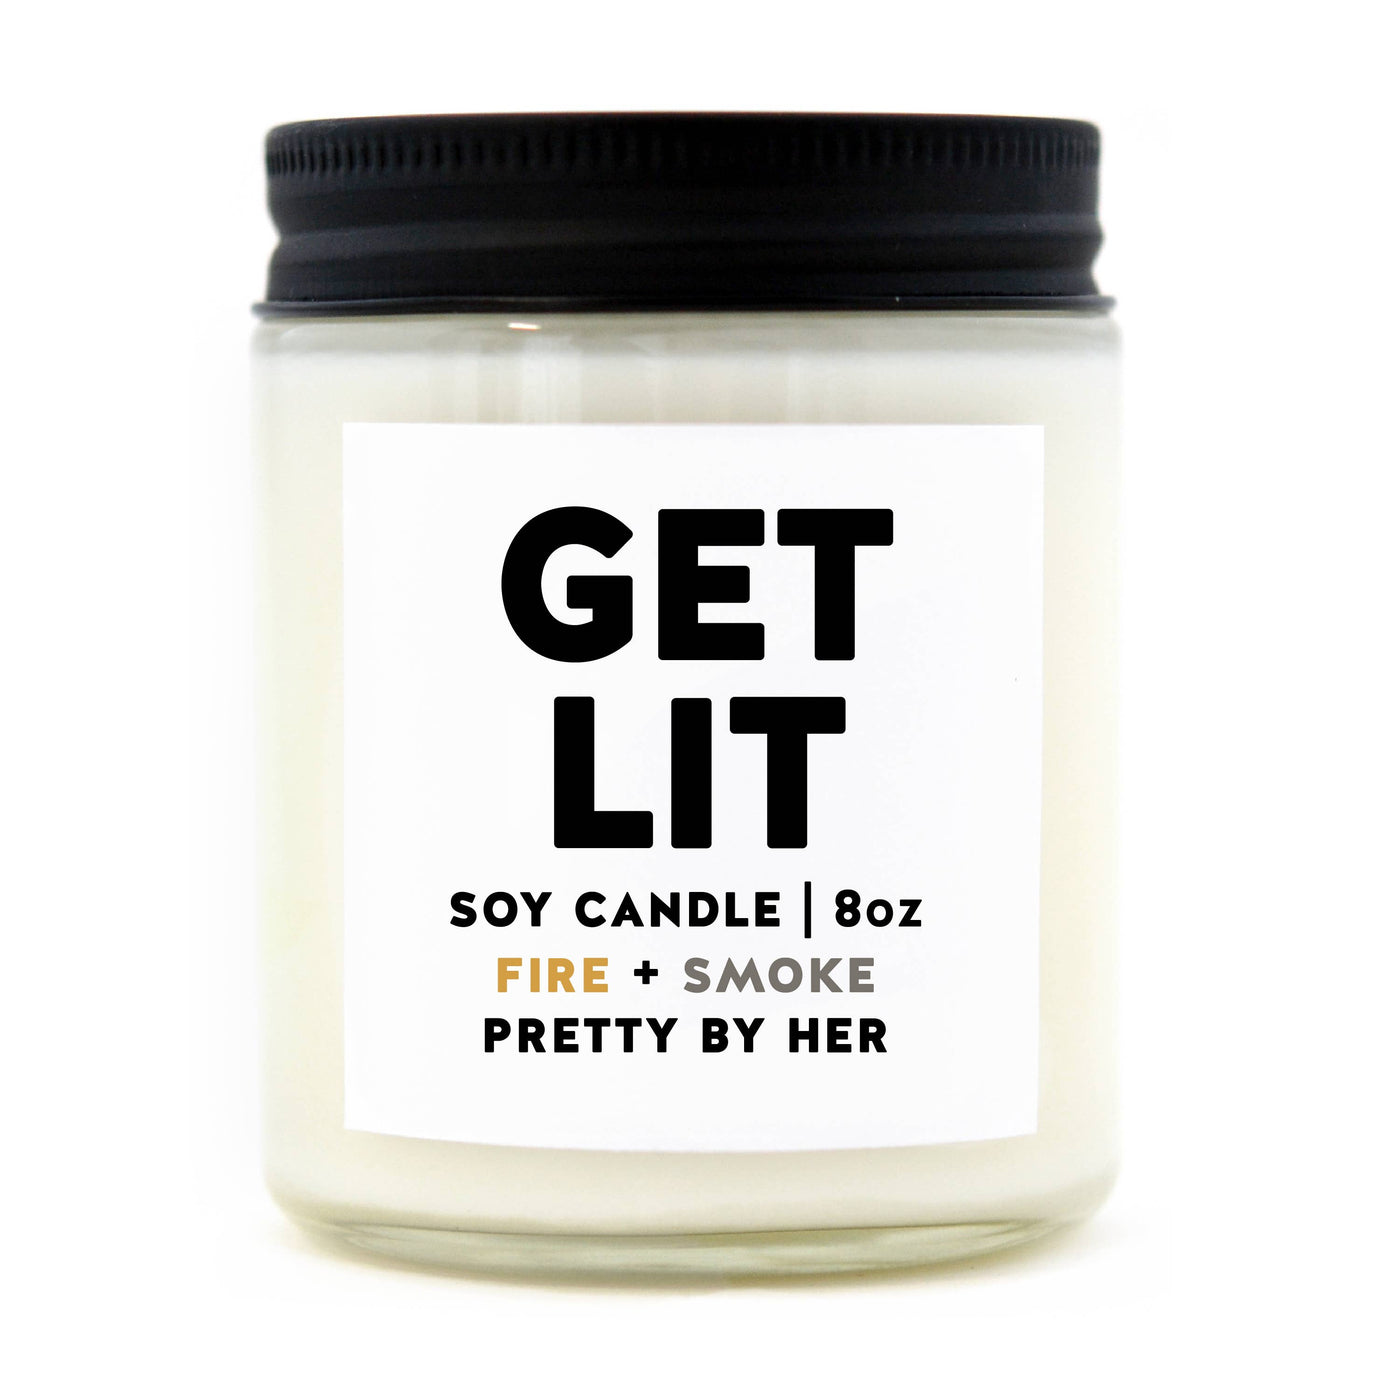 GET LIT CANDLE